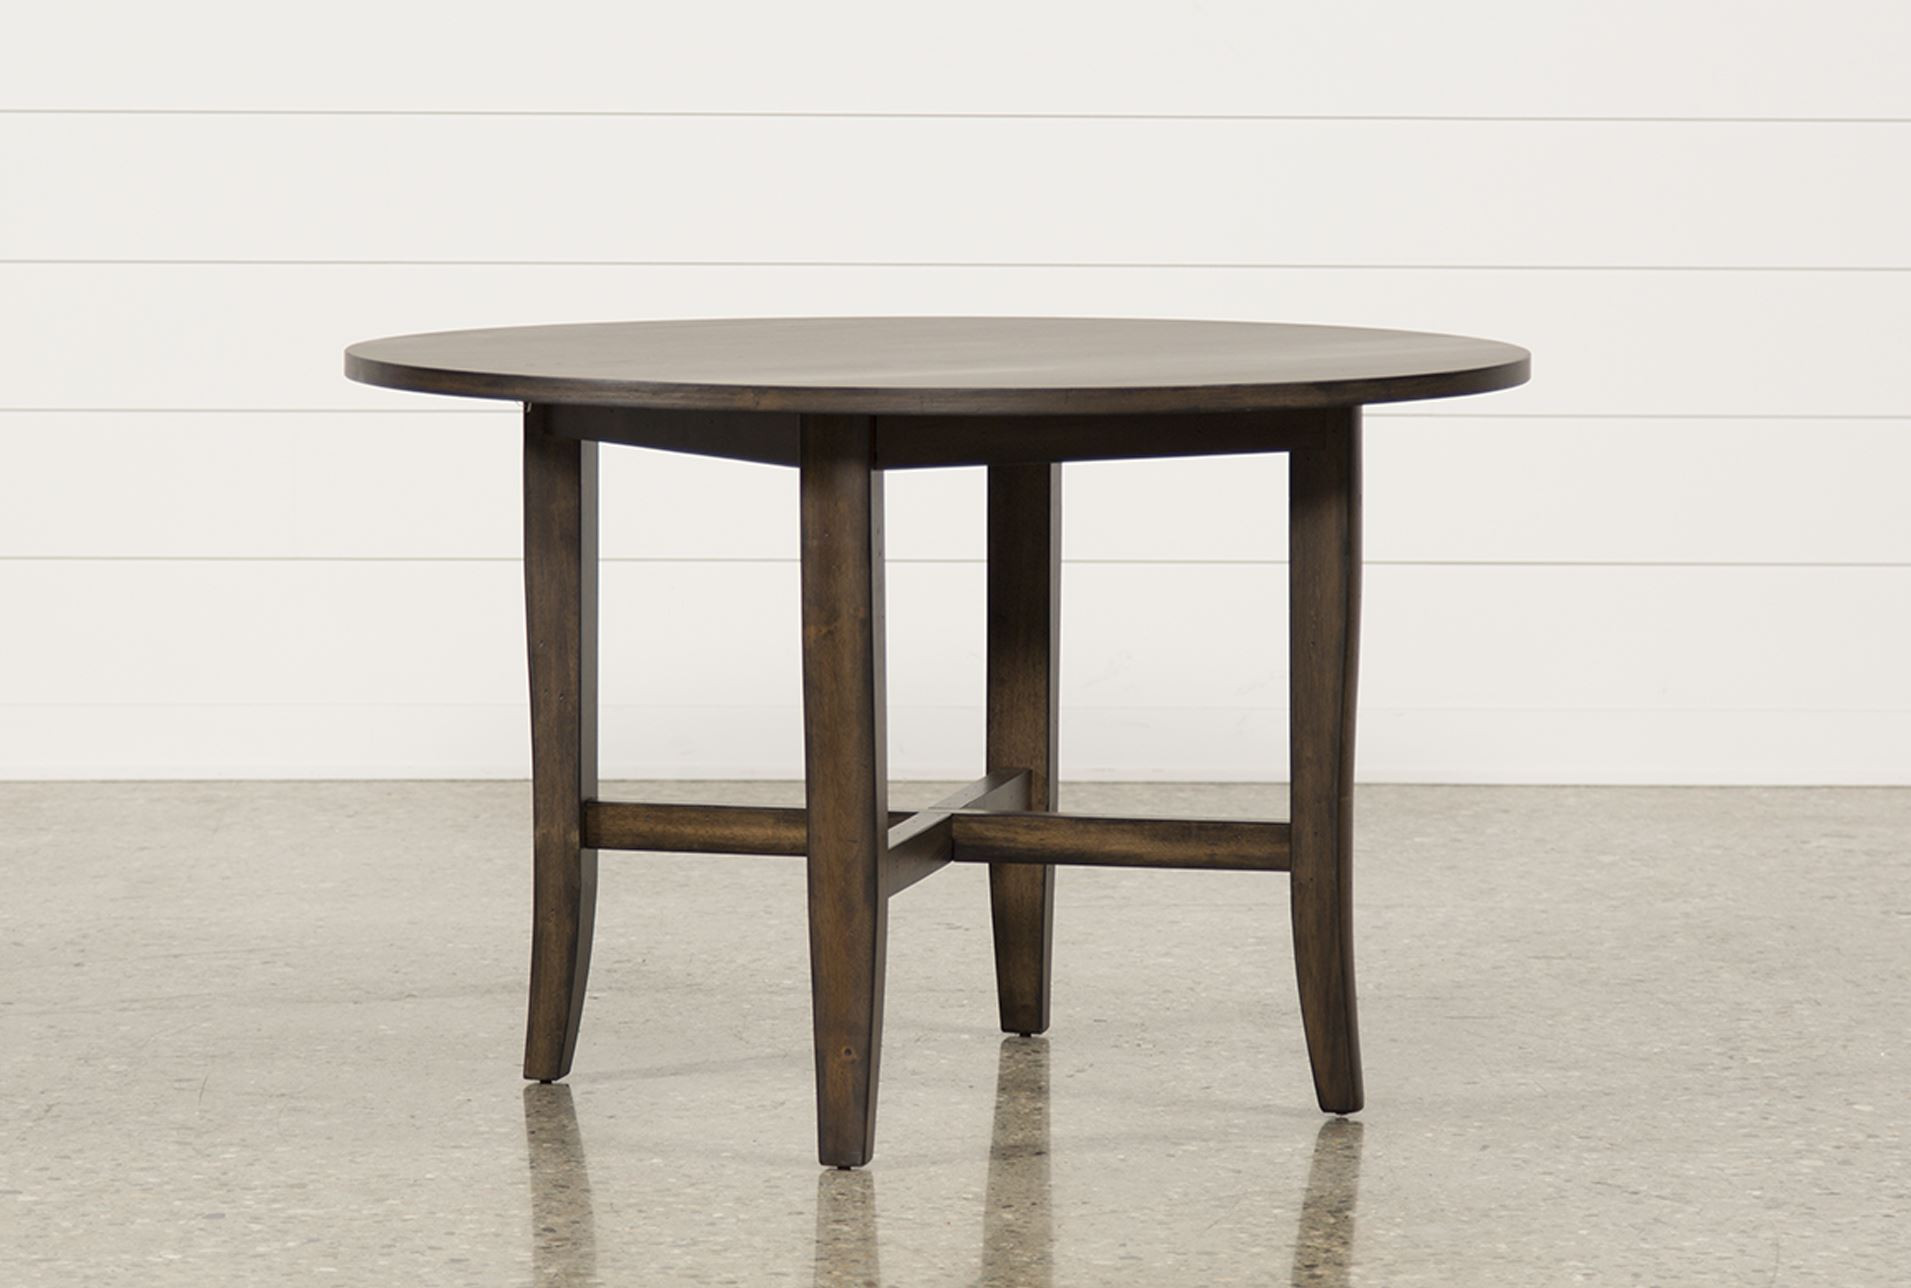 Living Spaces Dining Room Tables
 Grady Round Dining Table Living Spaces